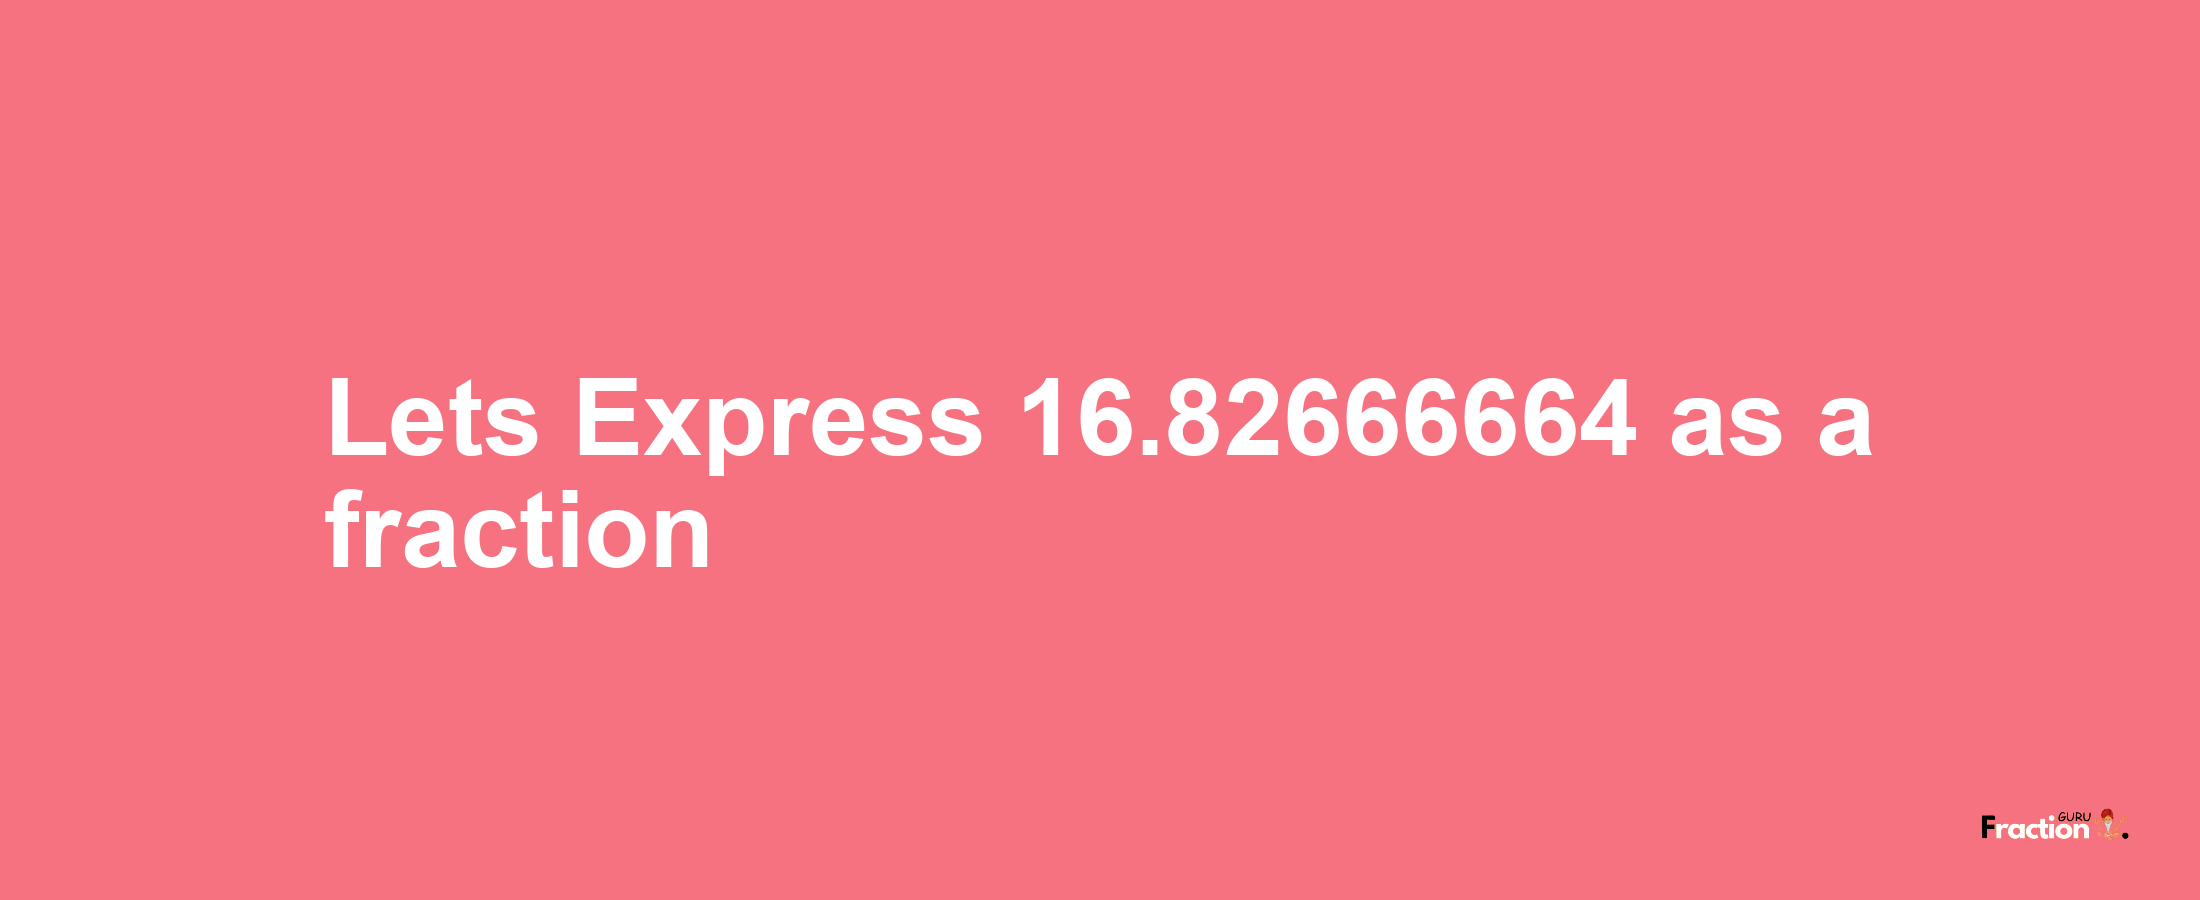 Lets Express 16.82666664 as afraction